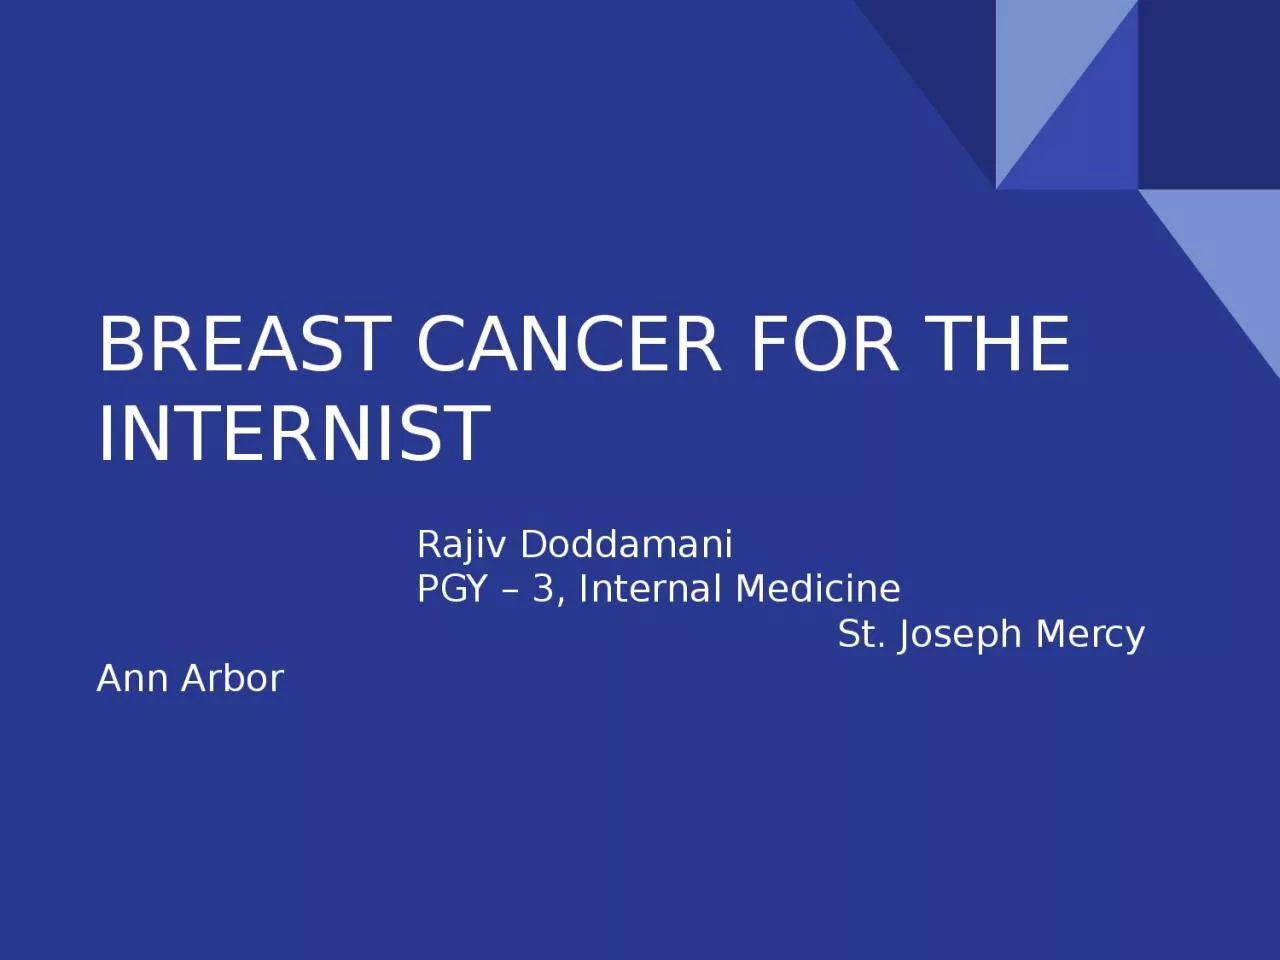 BREAST CANCER FOR THE INTERNIST